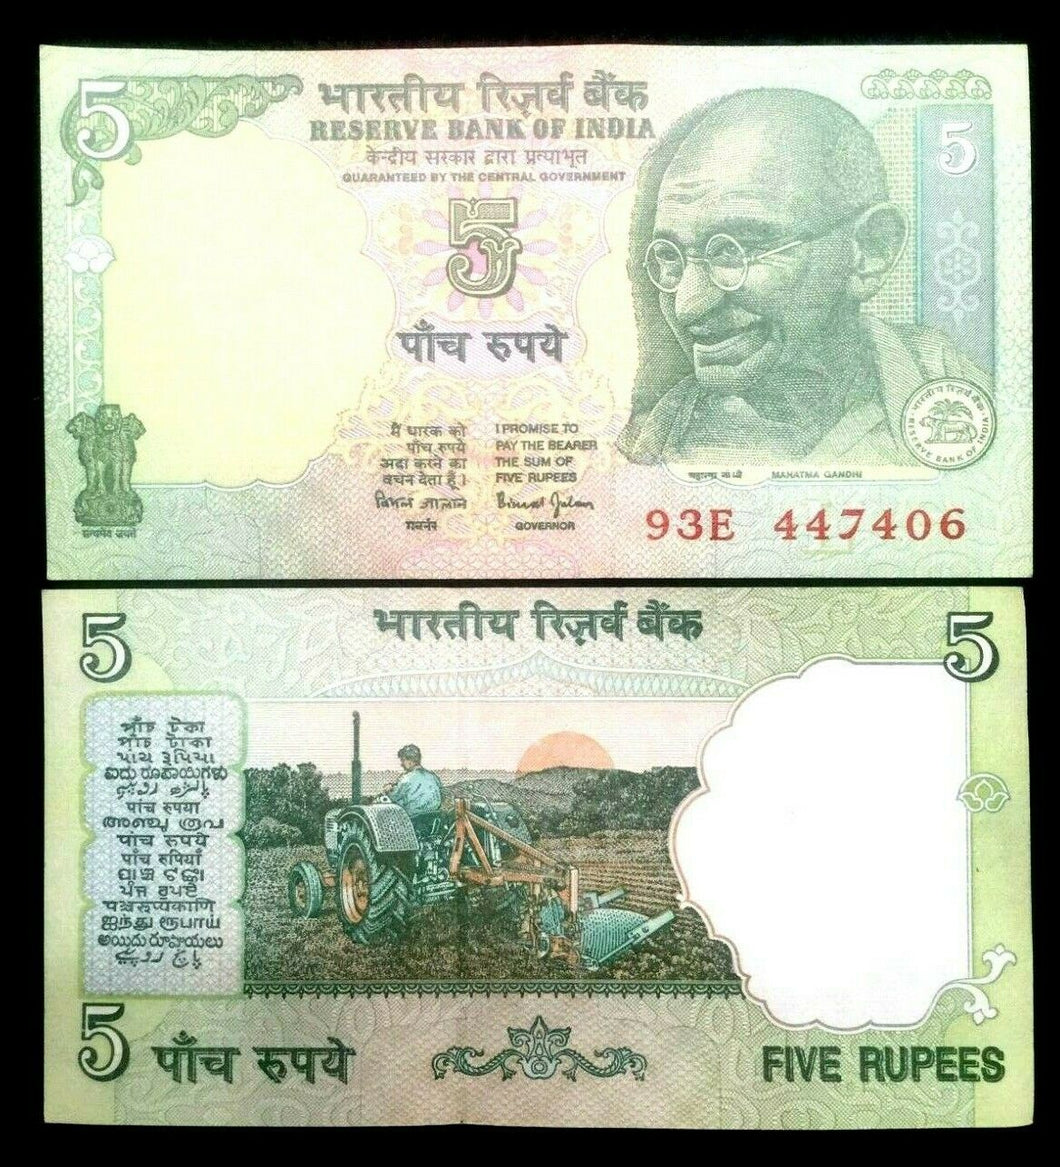 India 5 Rupees GANDHI Banknote World Paper Money UNC Currency Bill Note